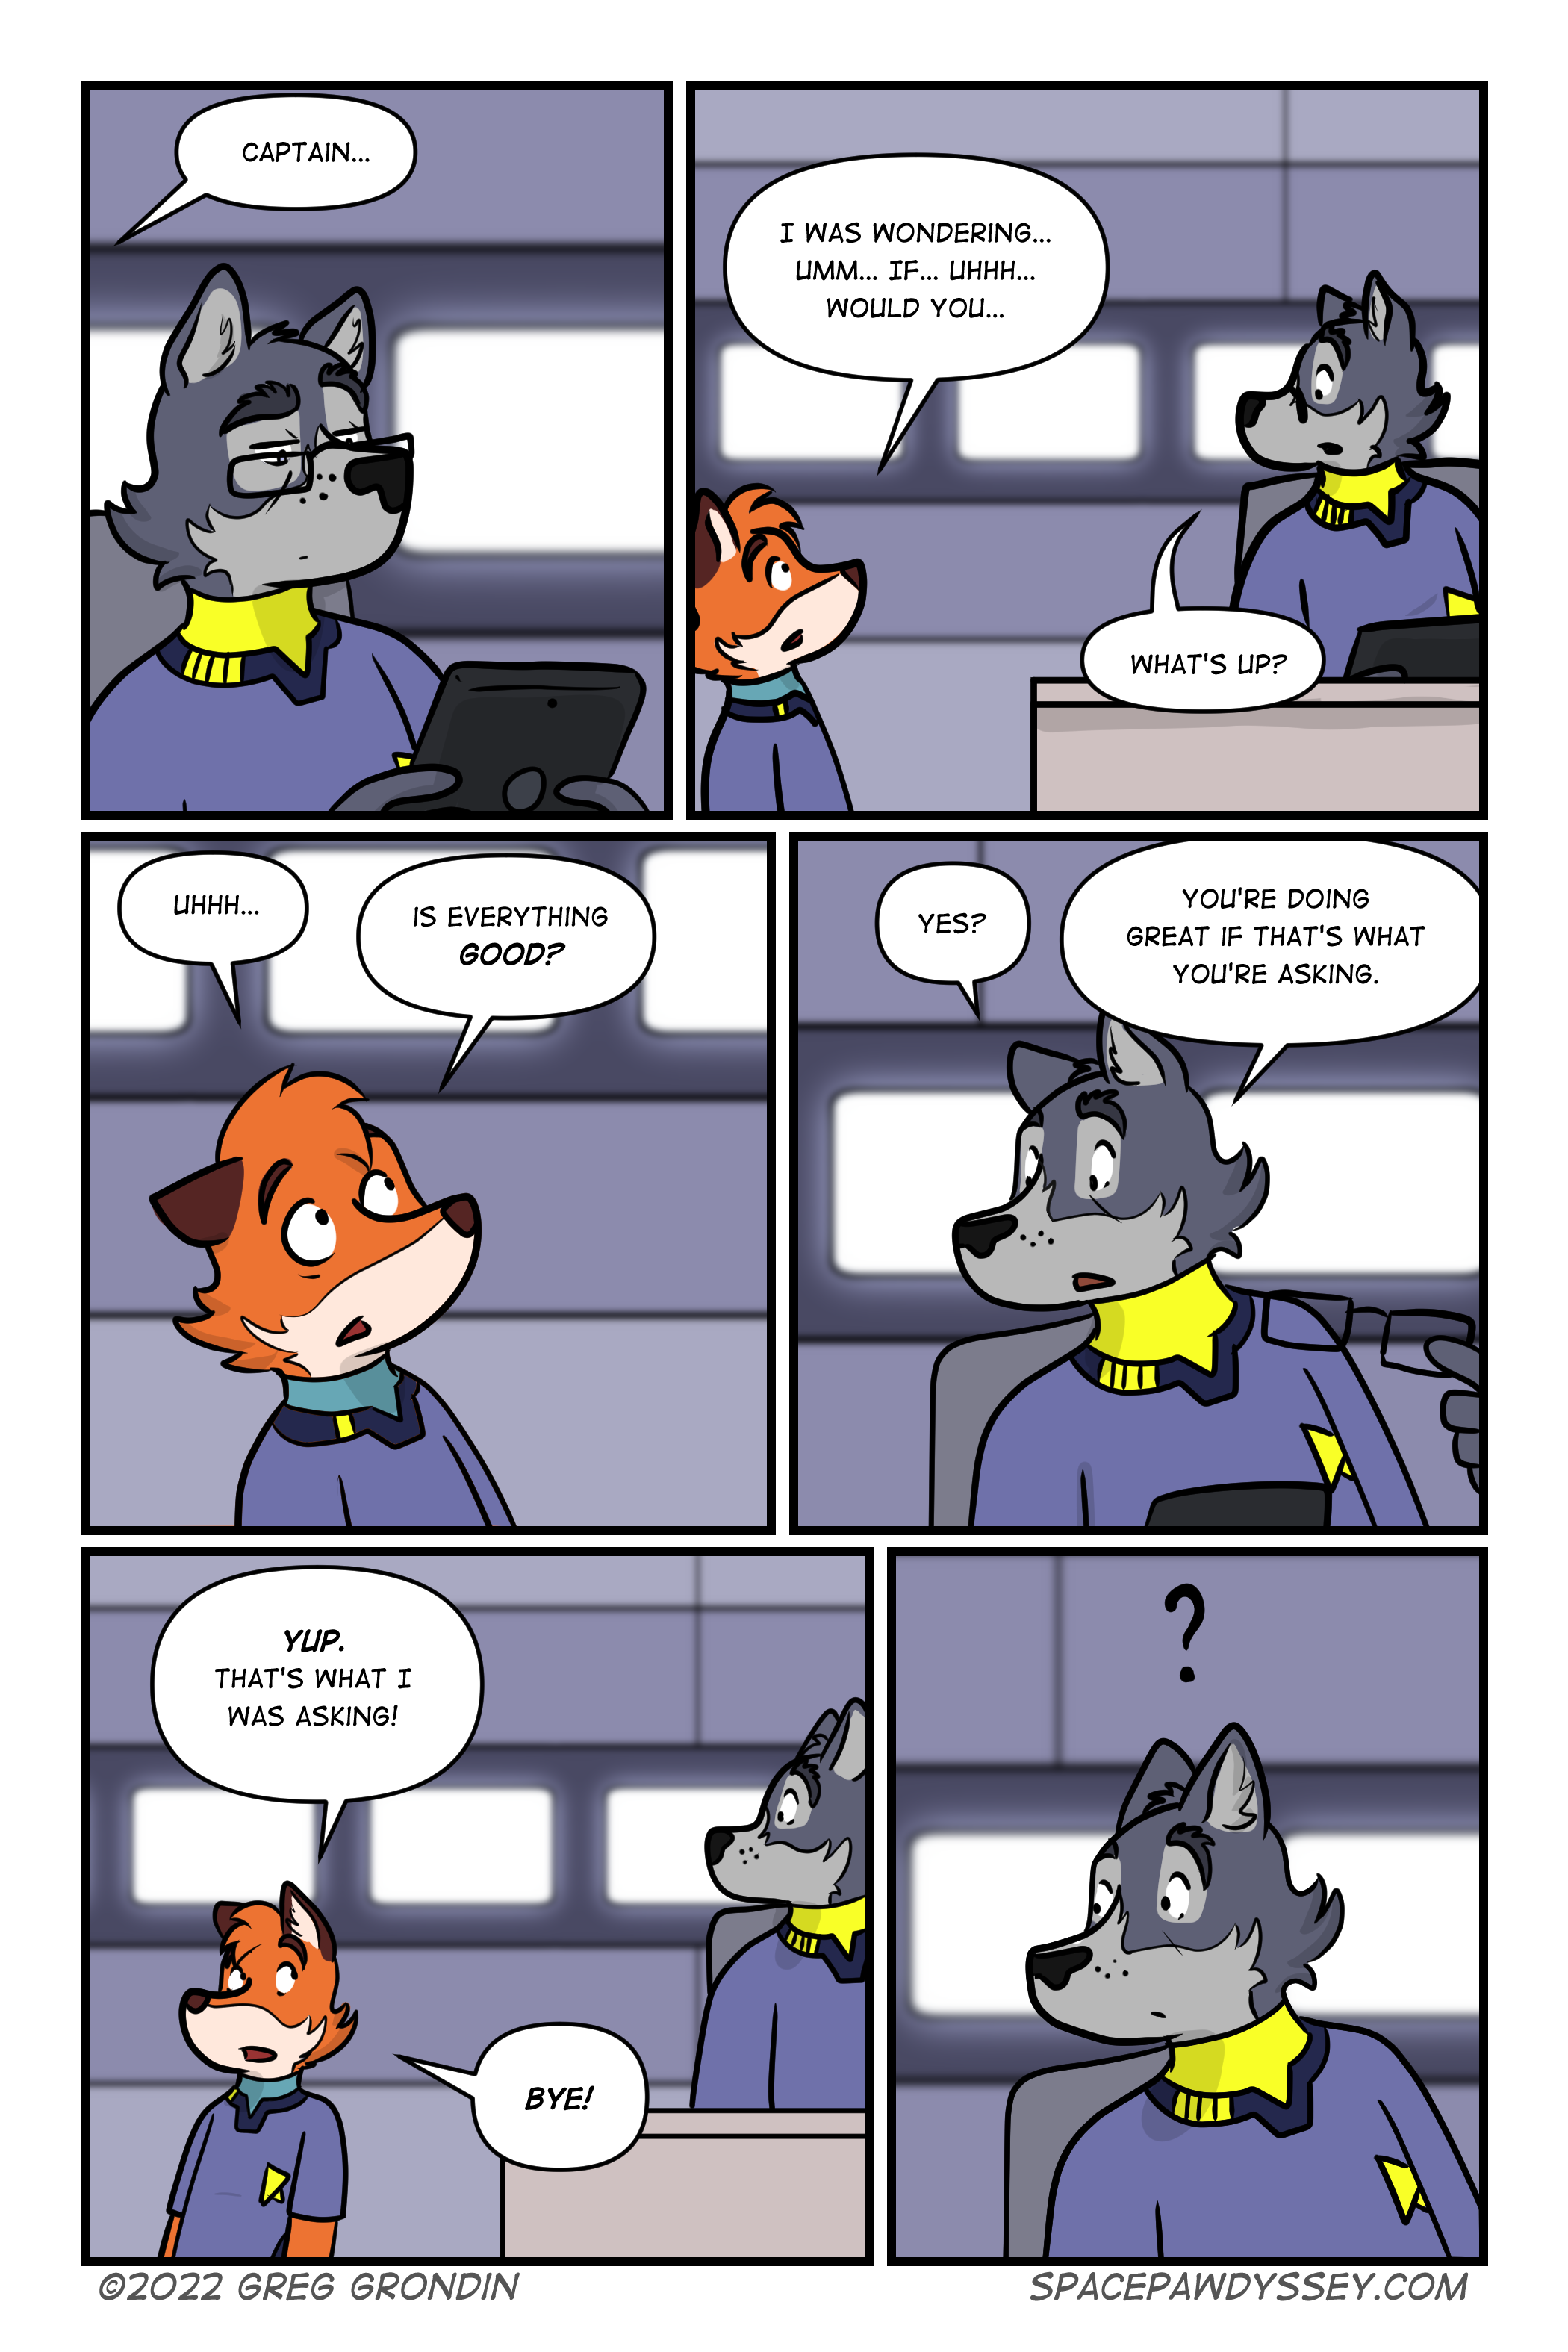 Space Pawdyssey #588